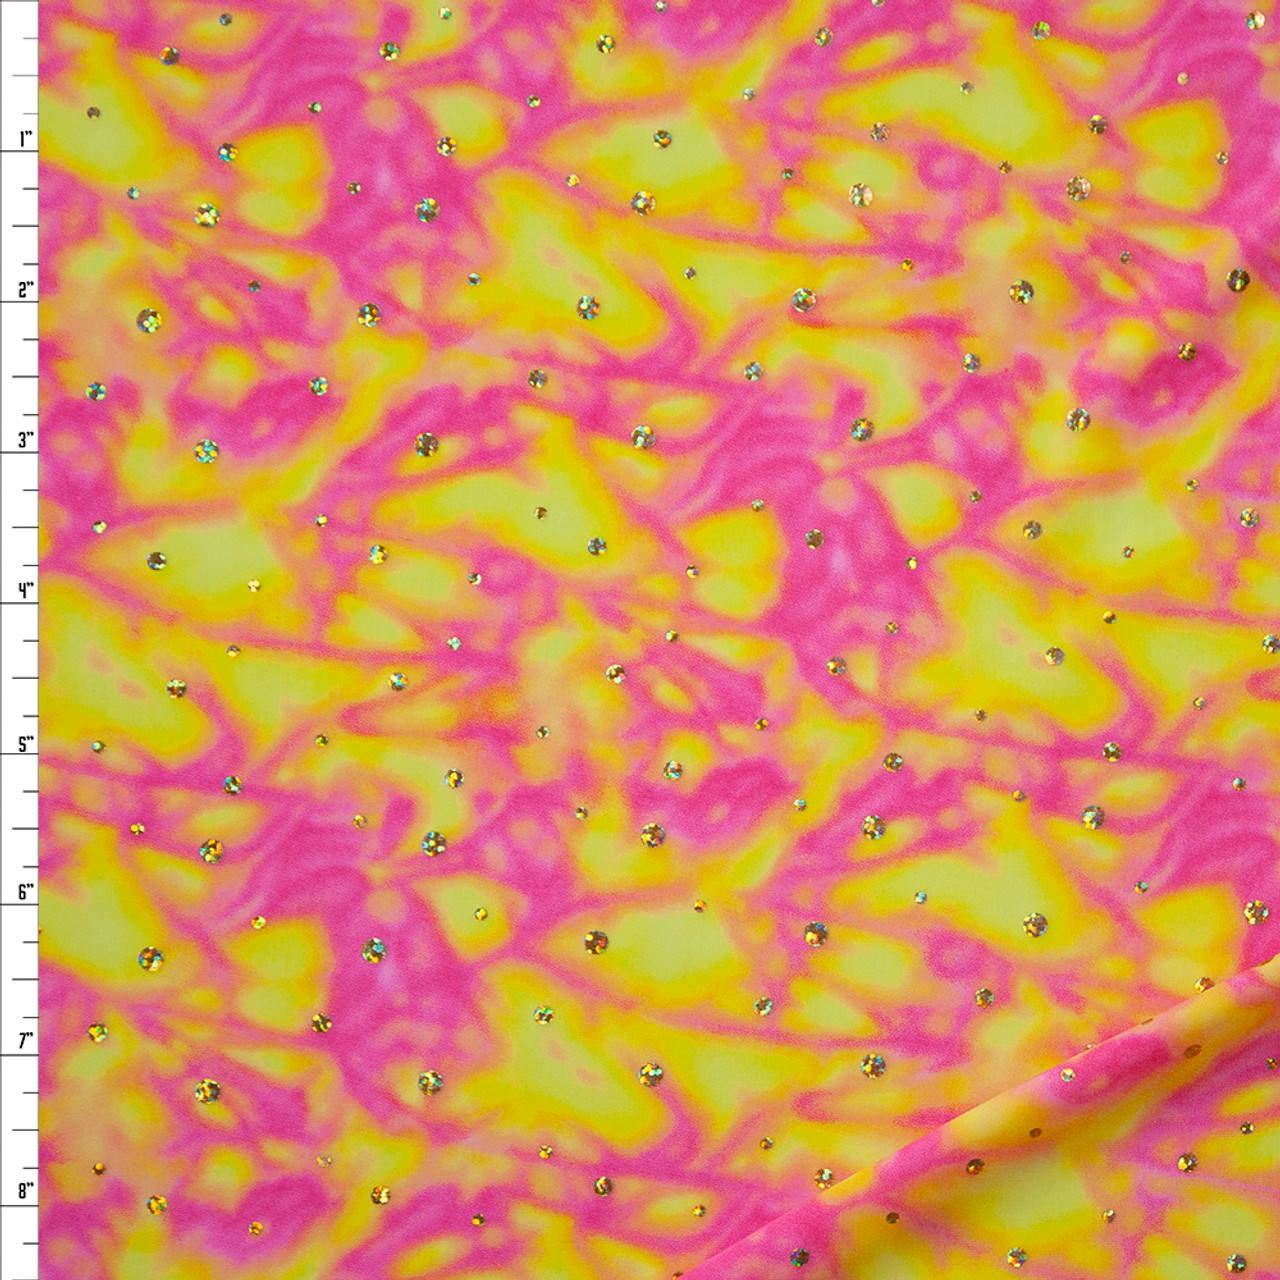 Cali Fabrics Holographic Gold Sequins on Yellow and Neon Pink Tie Dye Nylon/Spandex  Fabric by the Yard